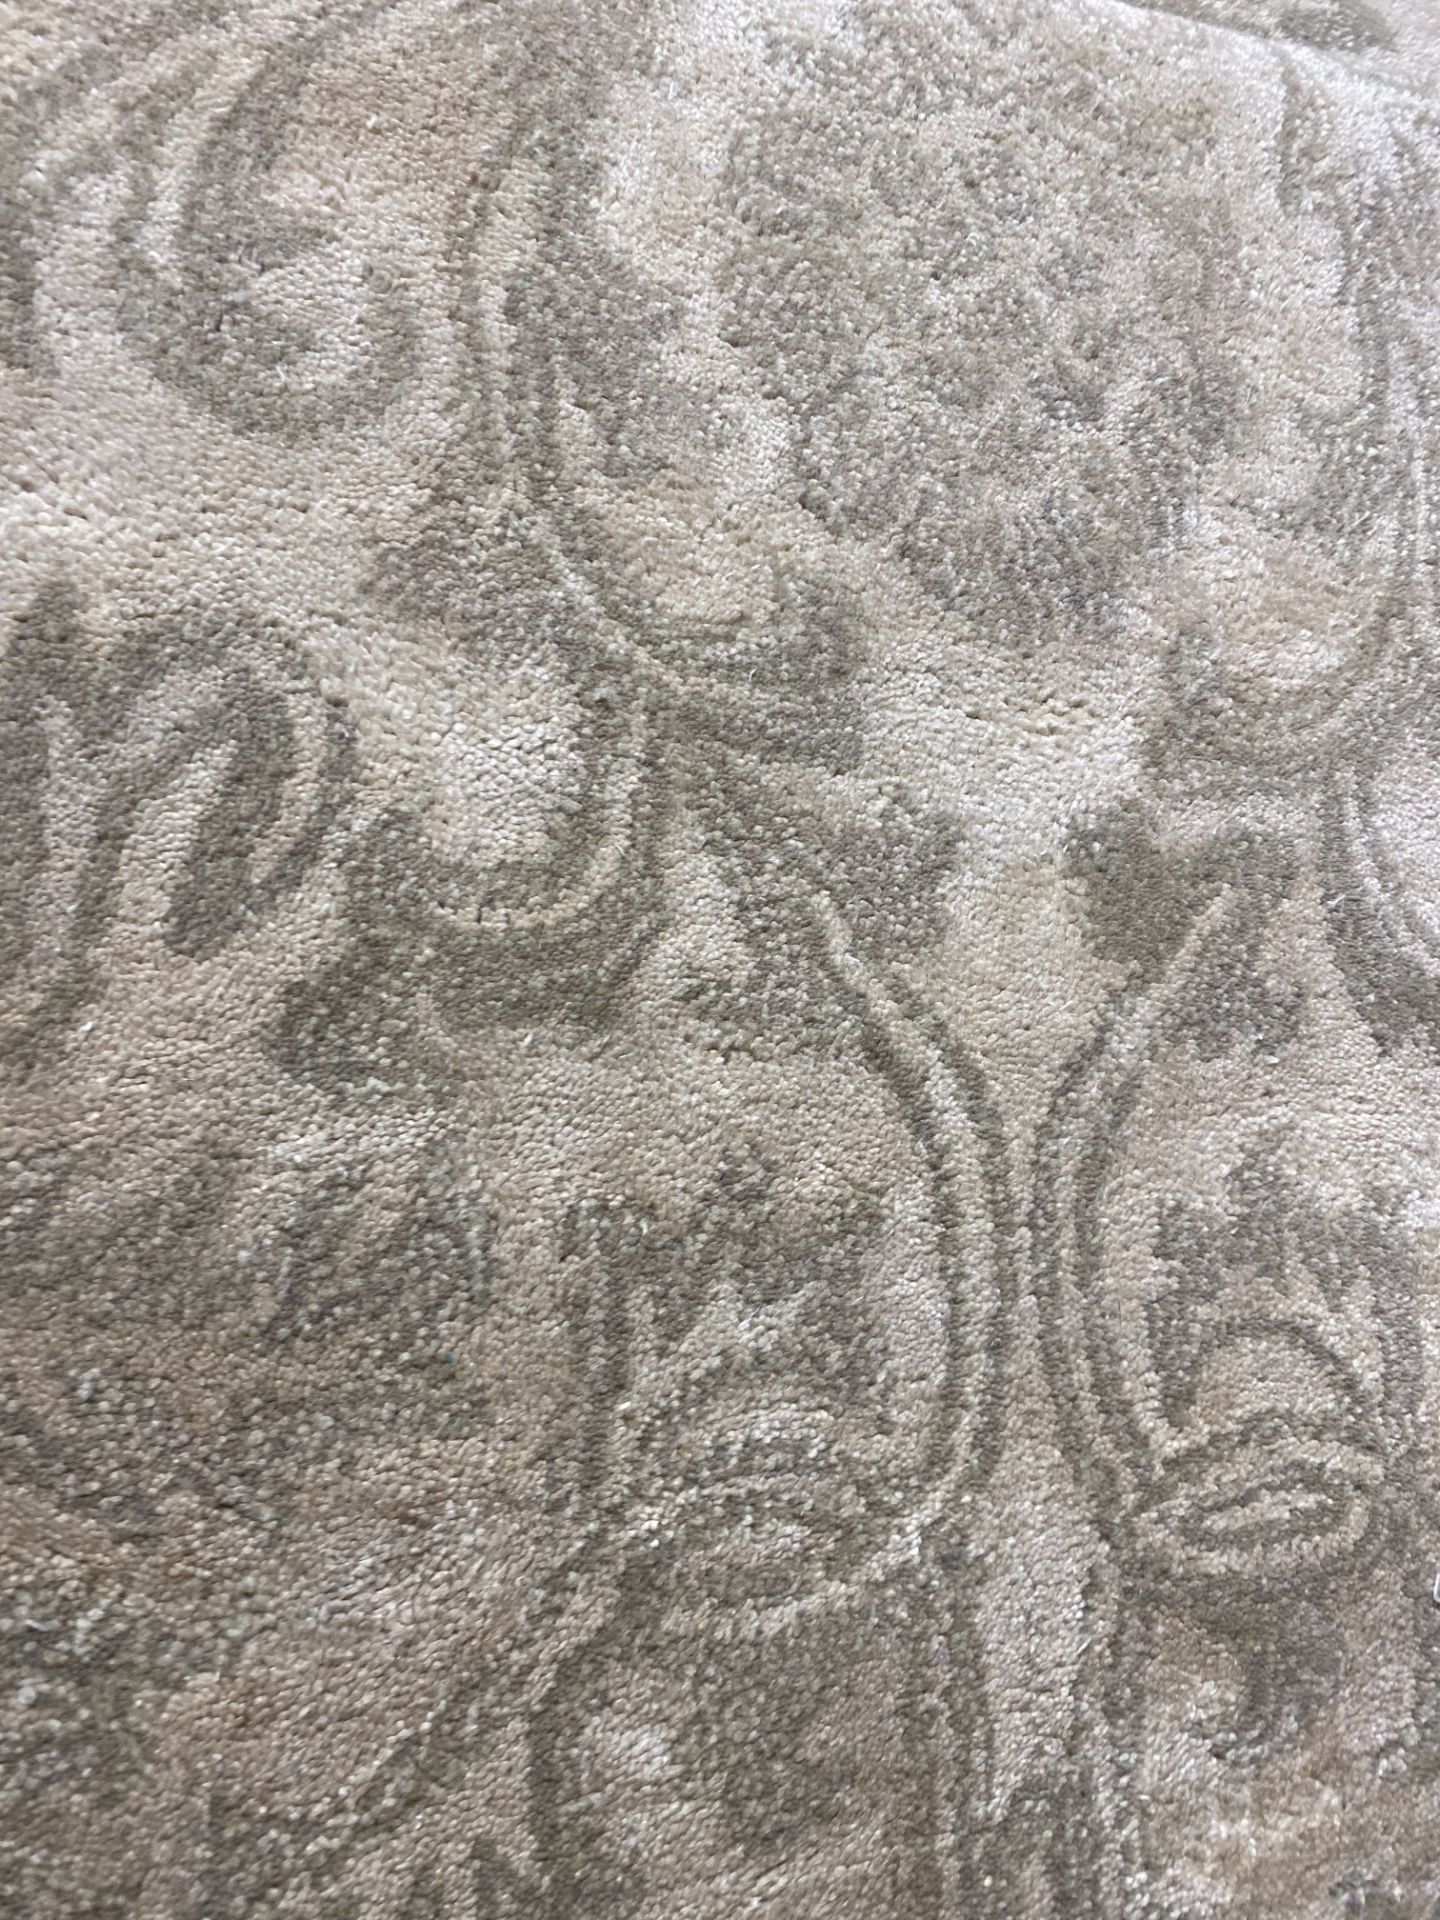 6' X 9' WOOL HAND MADE IN INDIA, MSRP $1,995, INVENTORY CODE OPAL TF222SK BEIGE - Image 2 of 6